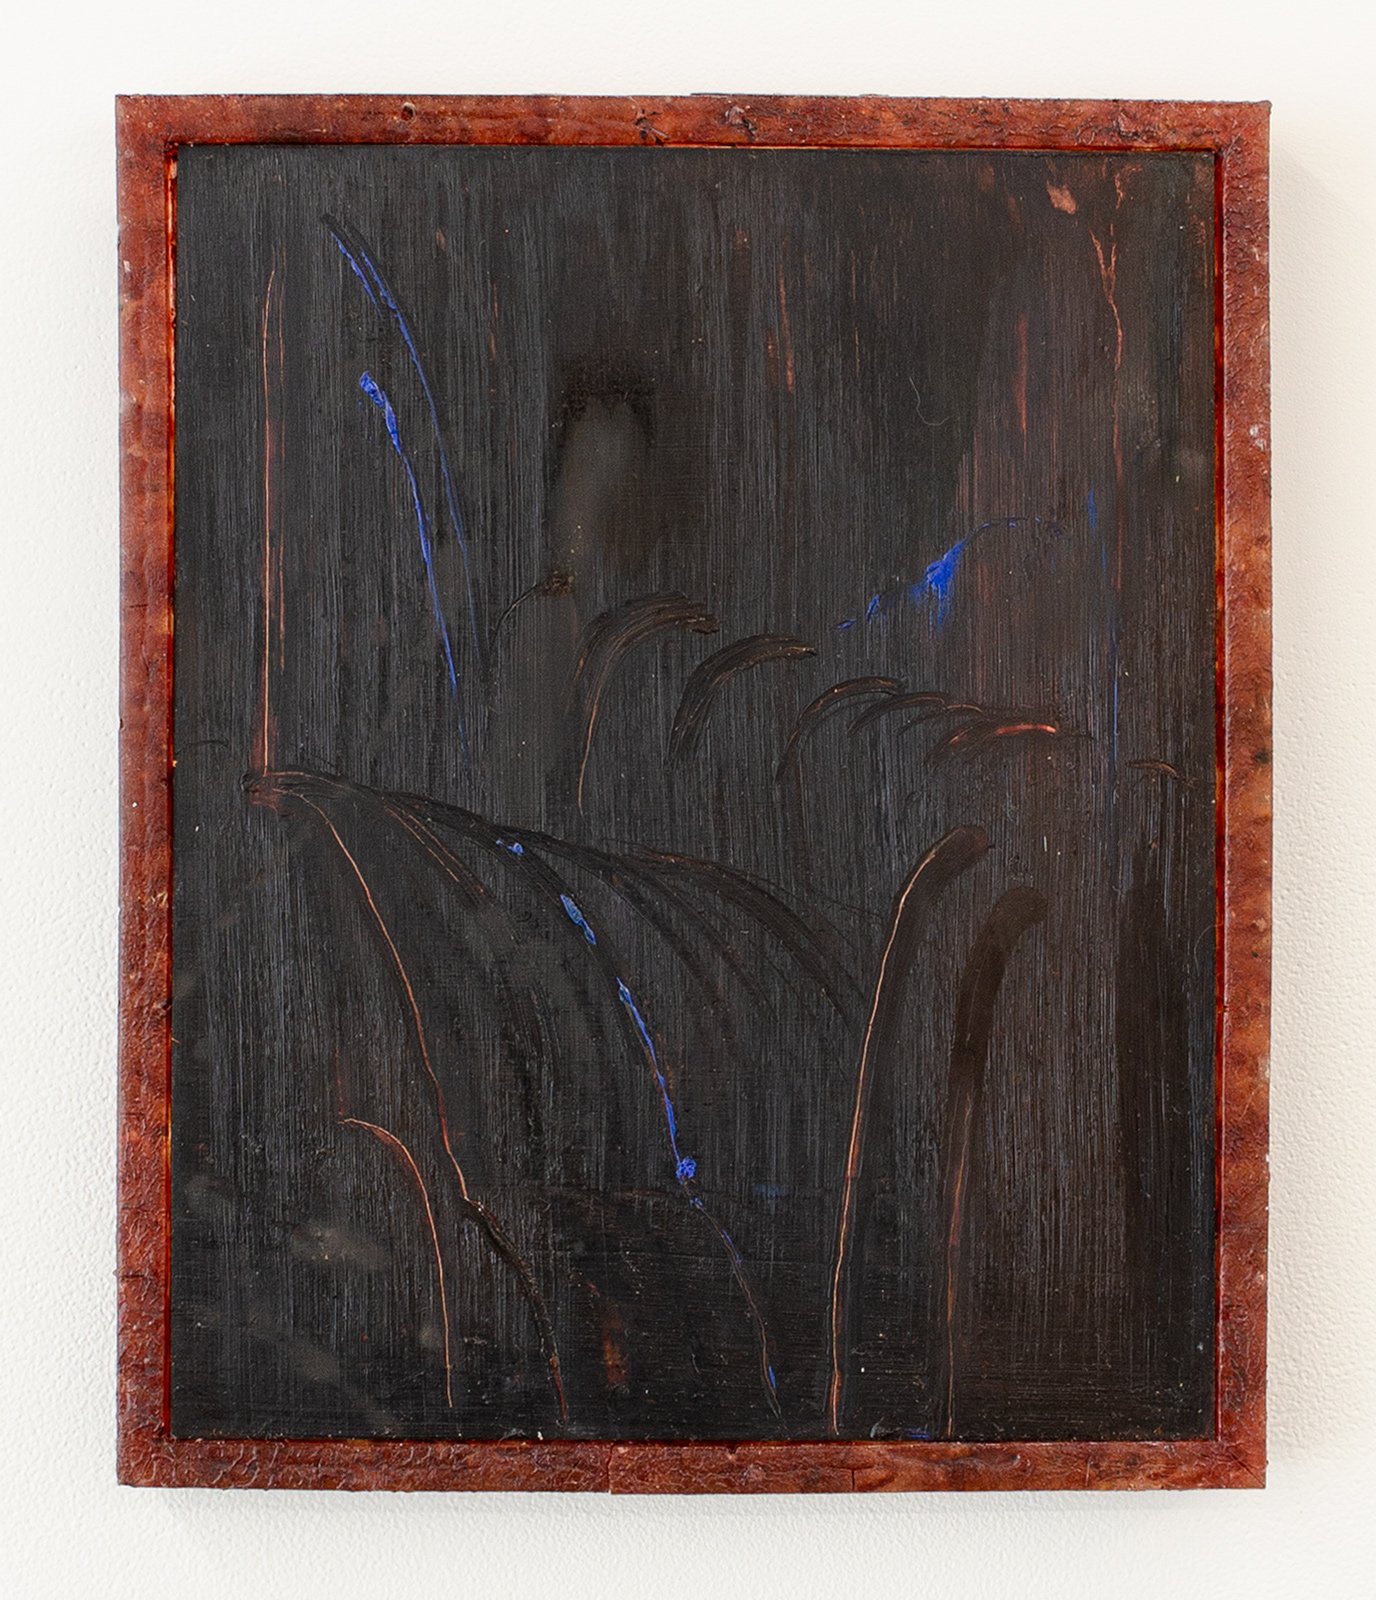  Water (soft), oil on copper, carpet and resin frame, 272 x 220 x 20 